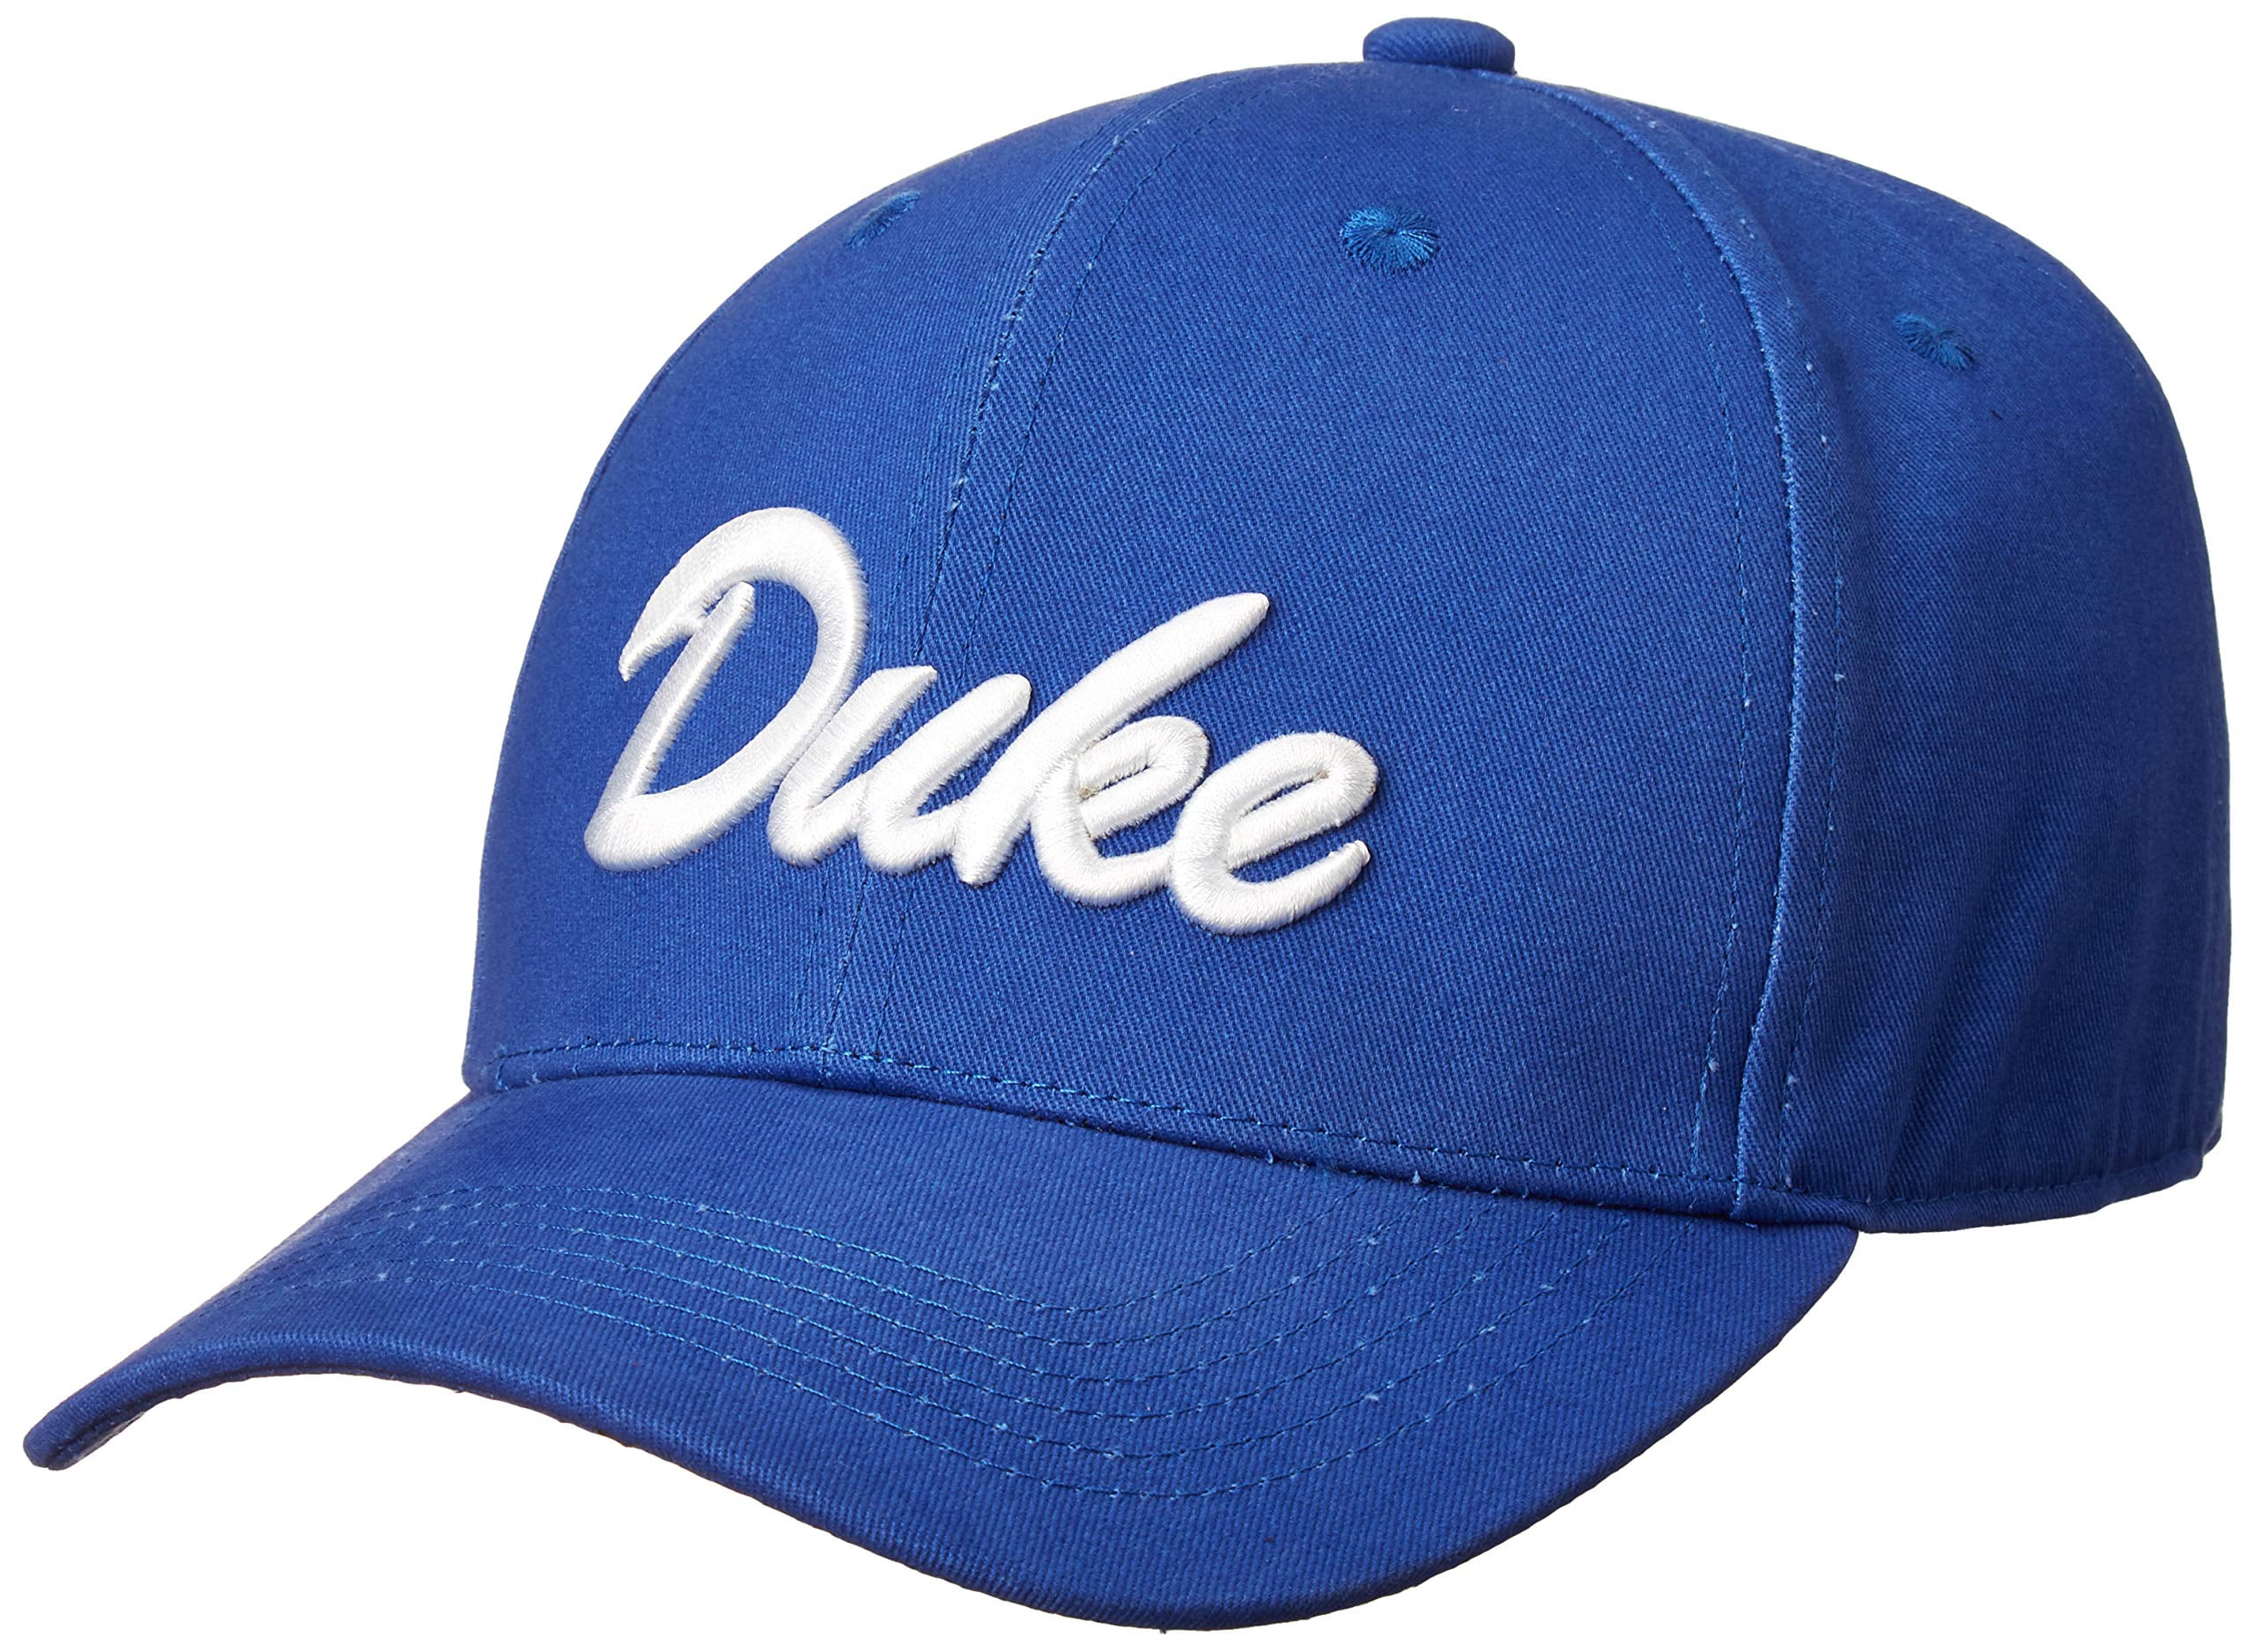 One Size Fits Most Duke University Blue Devils Embroidered Scrub Cap/Hat